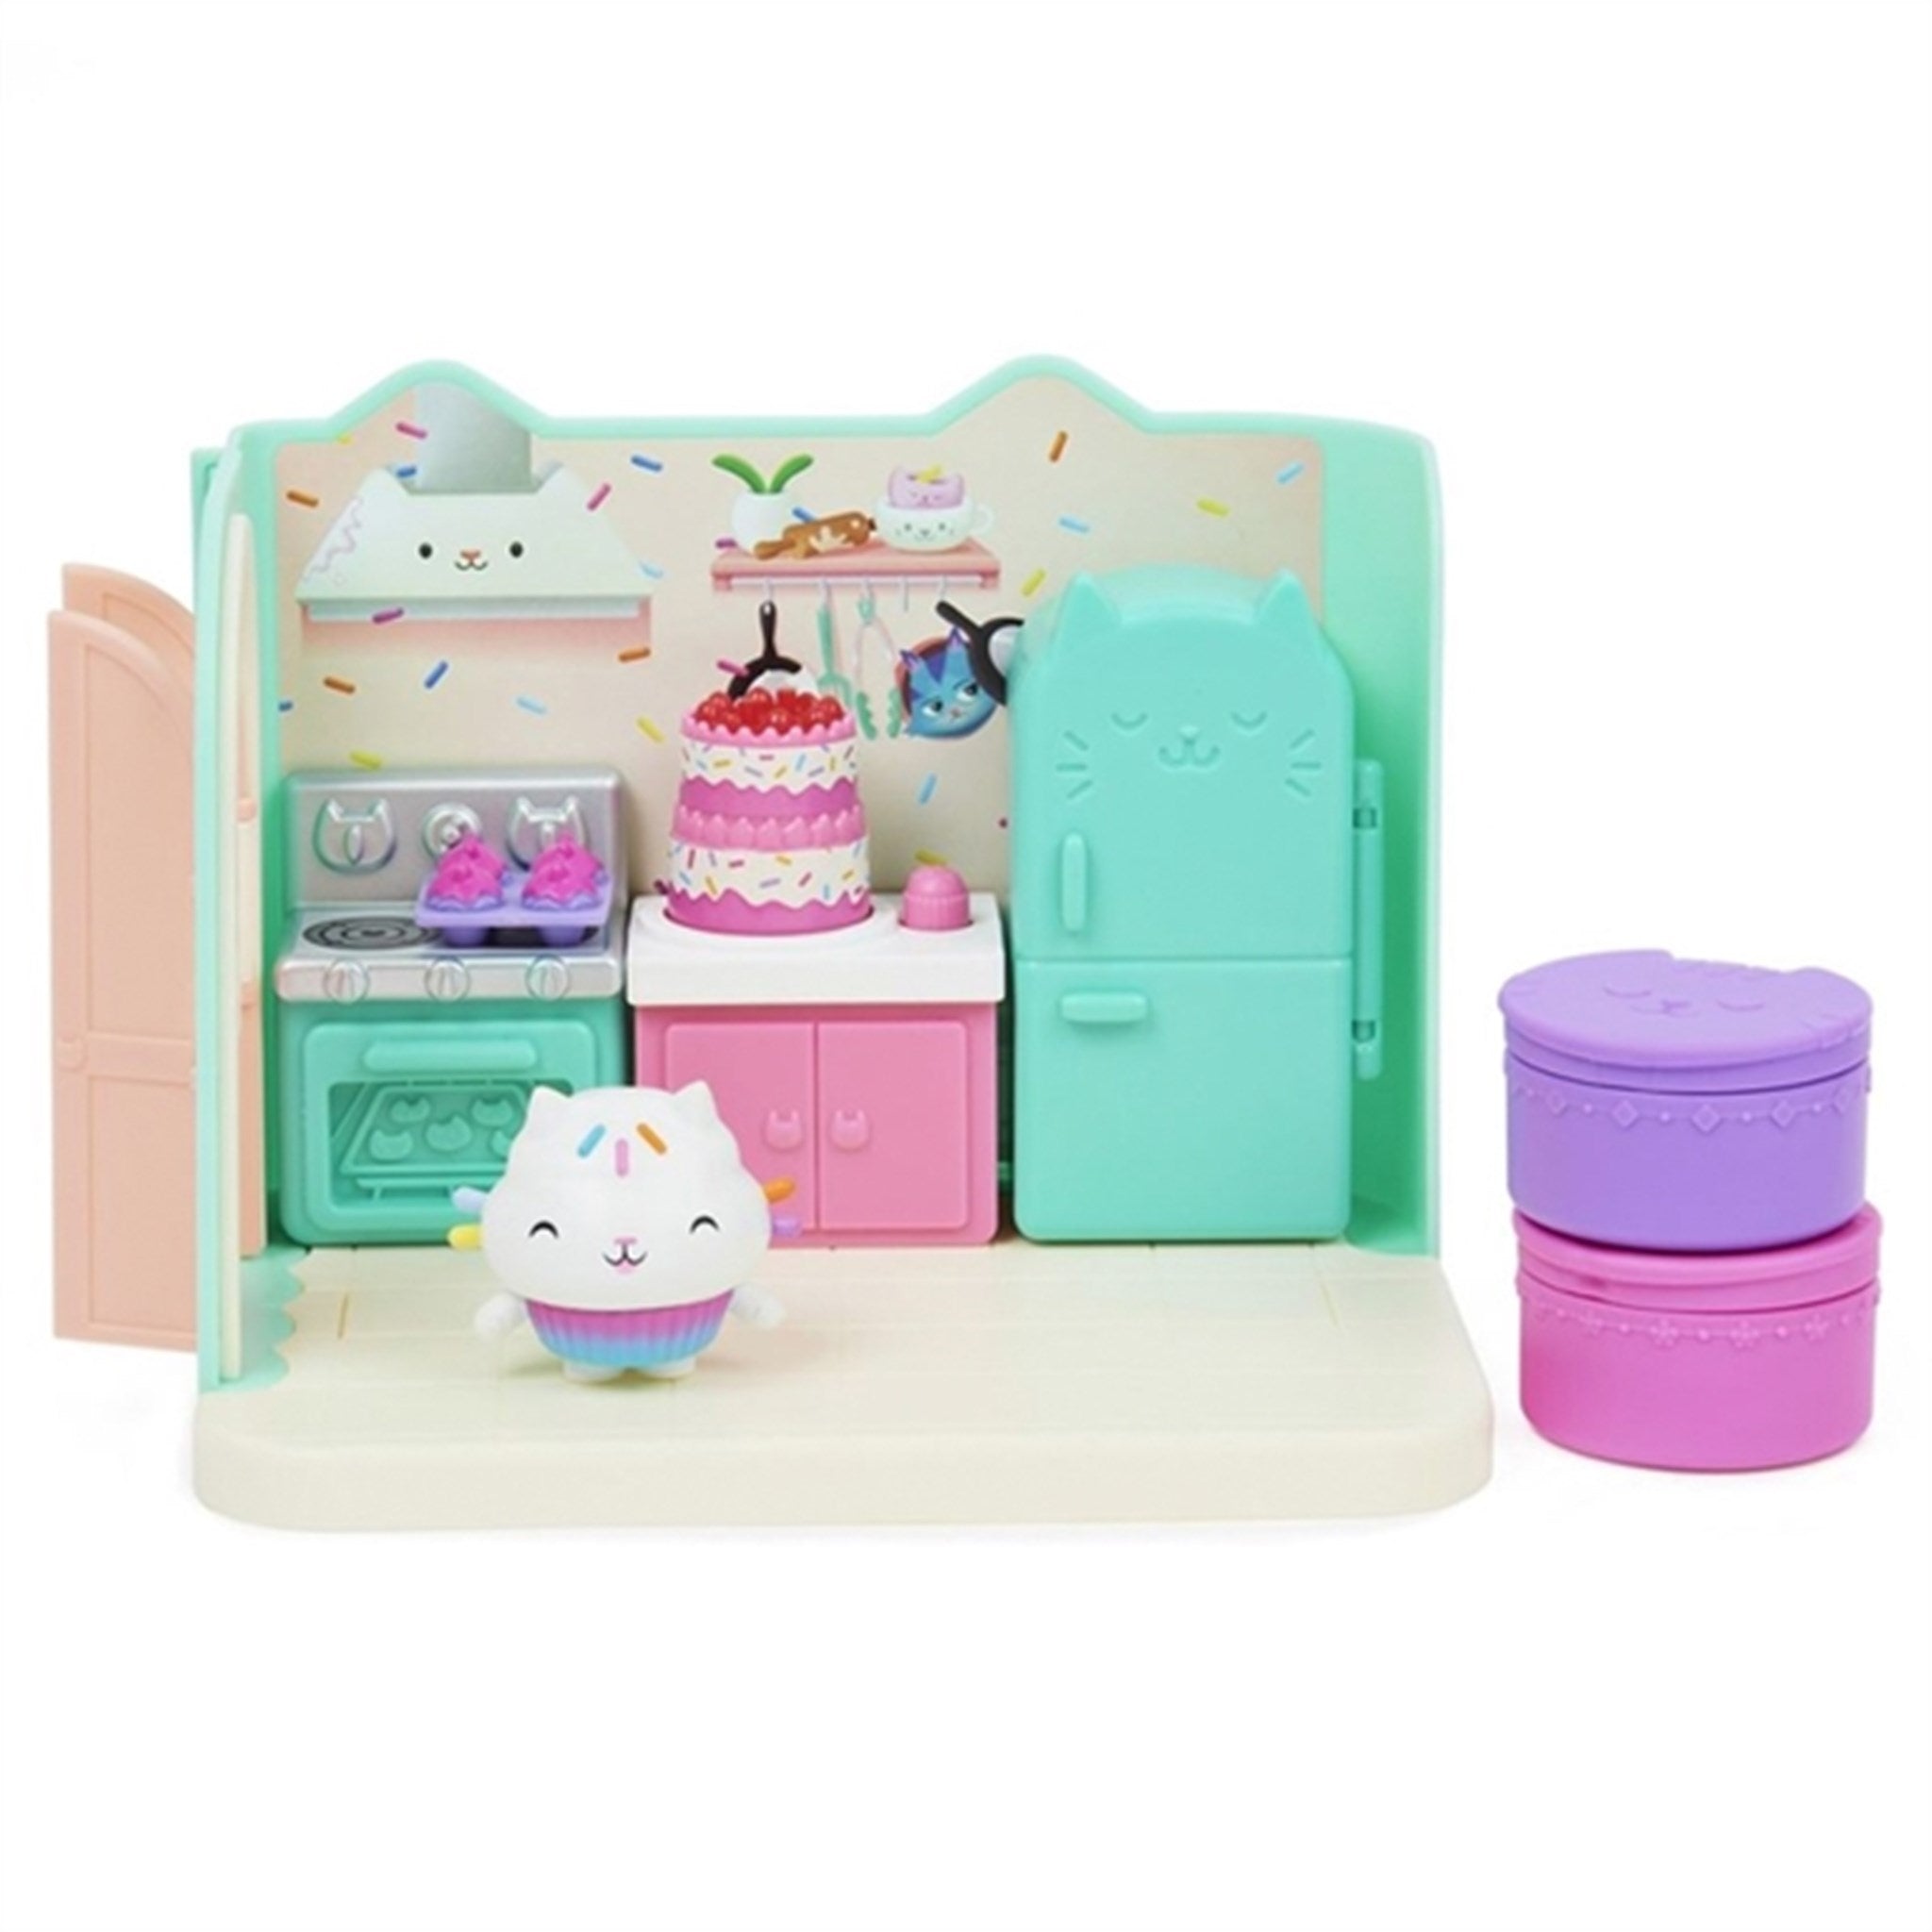 Gabby's Dollhouse - Deluxe Room - Cakey's Kitchen 3